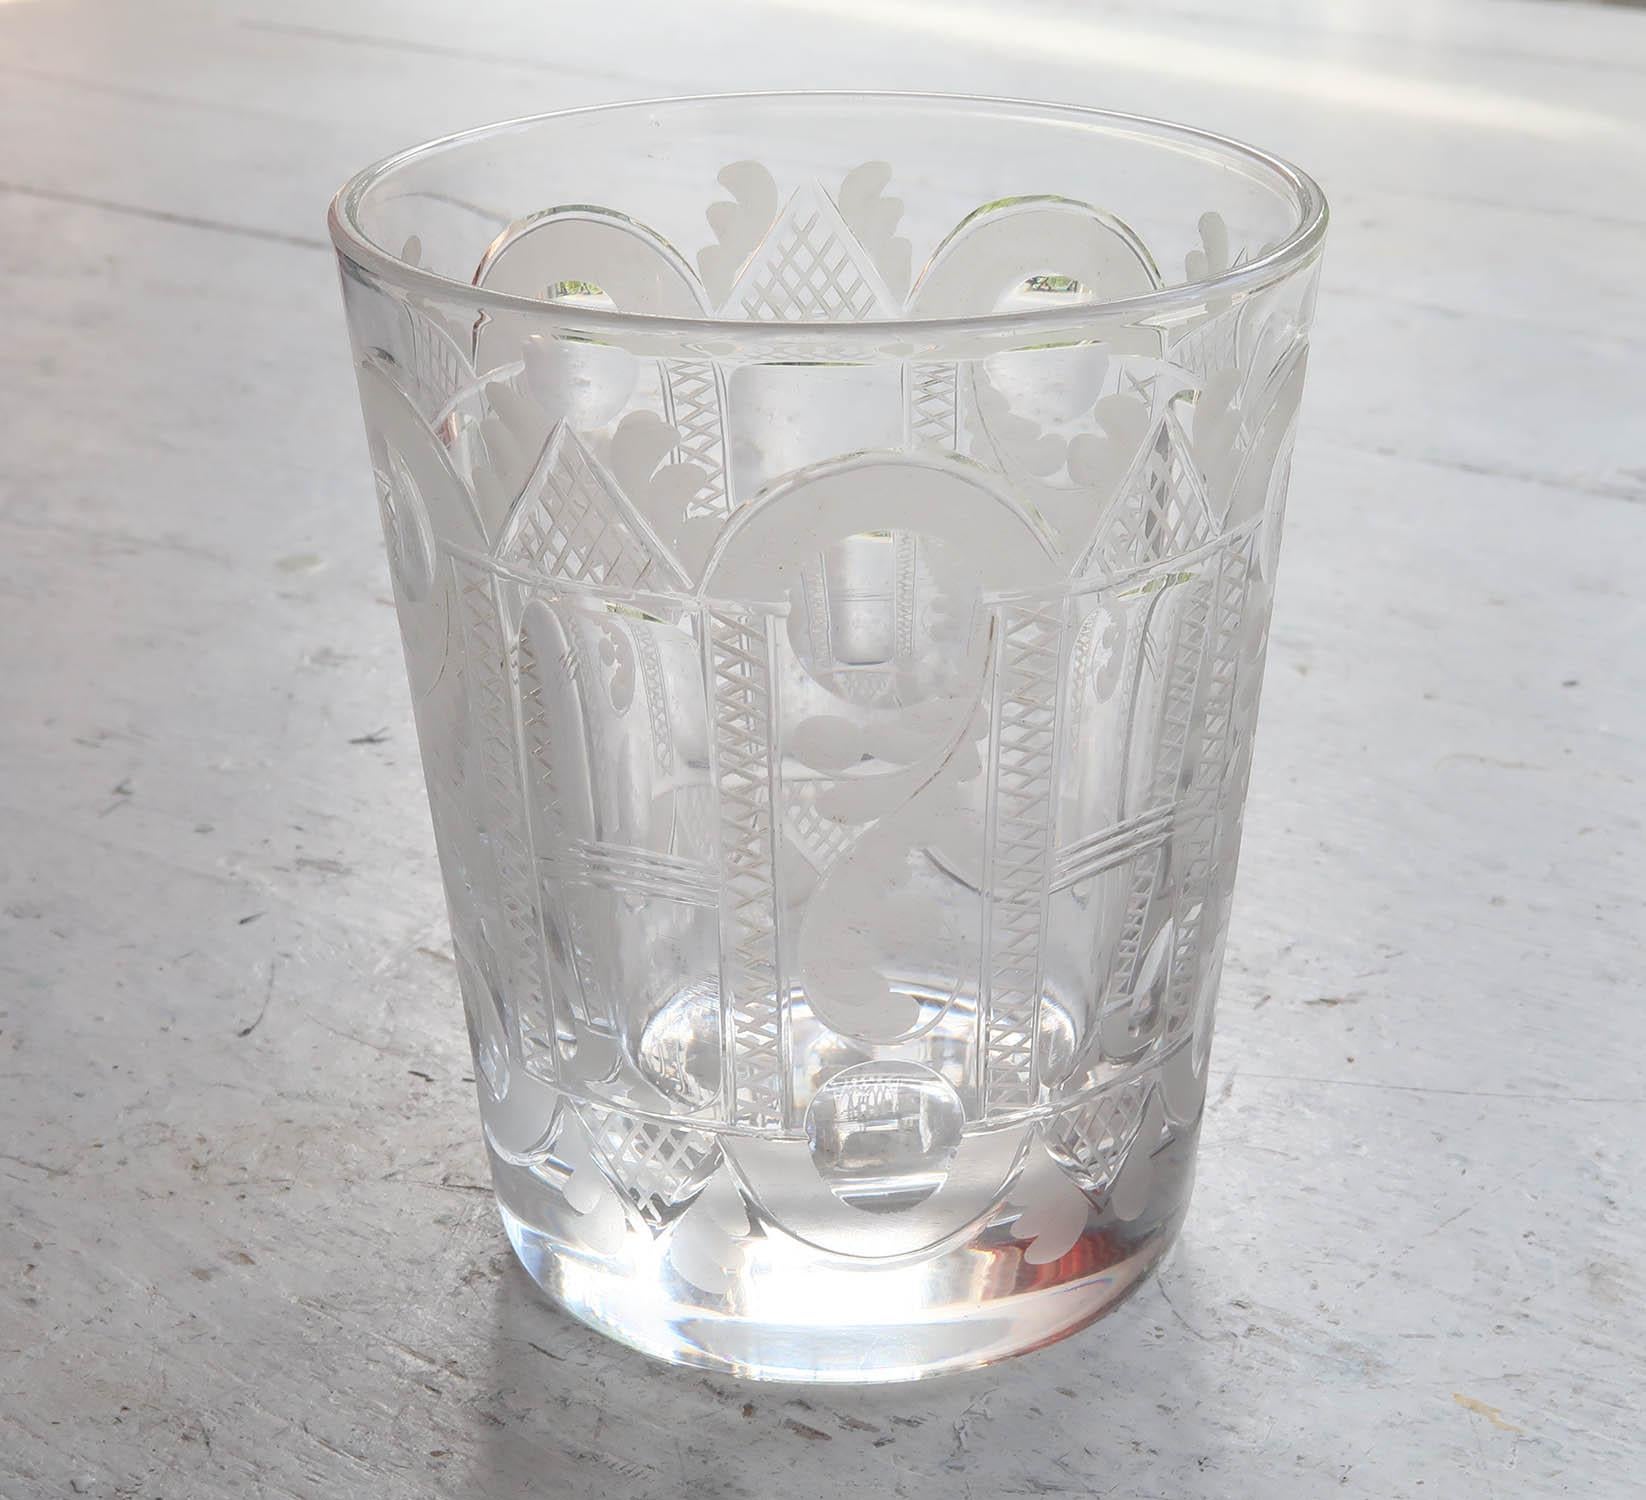 Wonderful Georgian style whisky tumbler

Most unusual almost architectural ornament

Finely cut, engraved and acid etched crystal.

Lovely to use.

Heavy quality

 In perfect condition.

